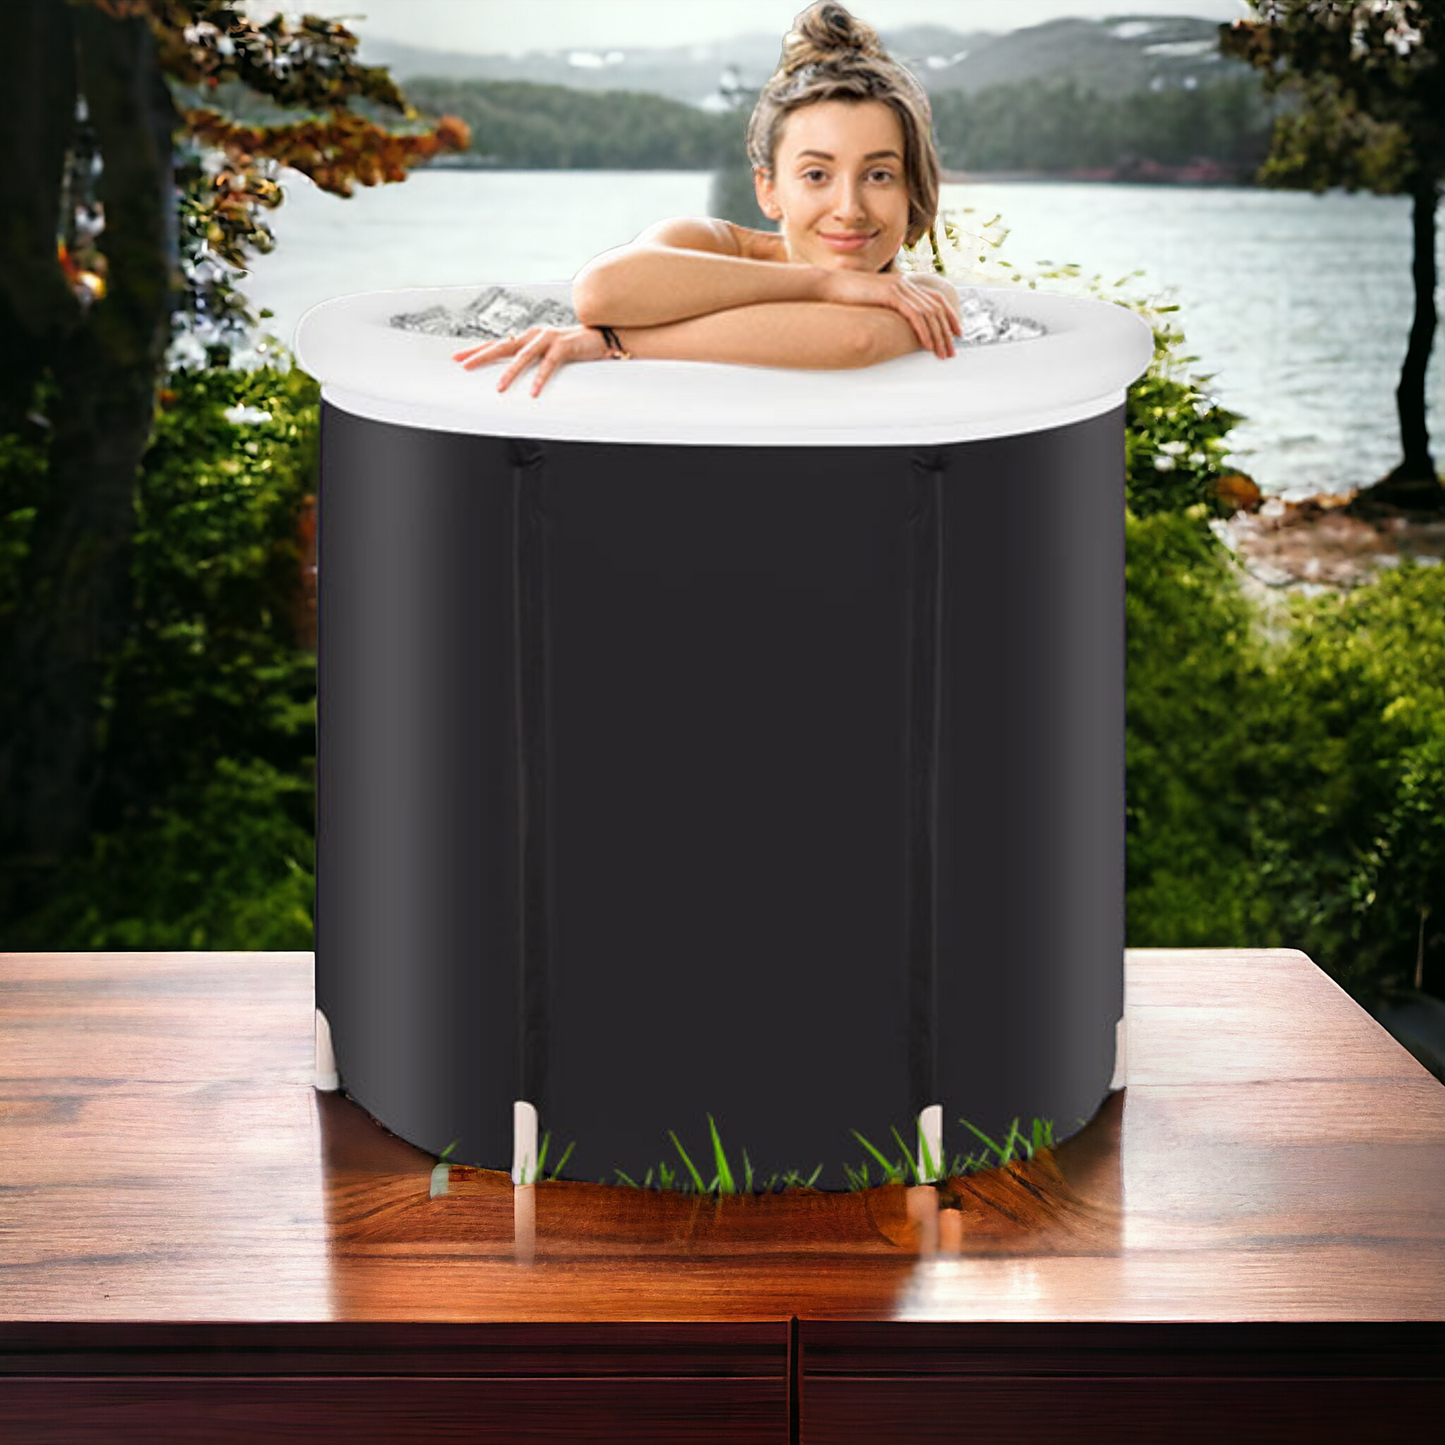 Foldable Adult Outdoor Portable Cold Water Therapy Tub